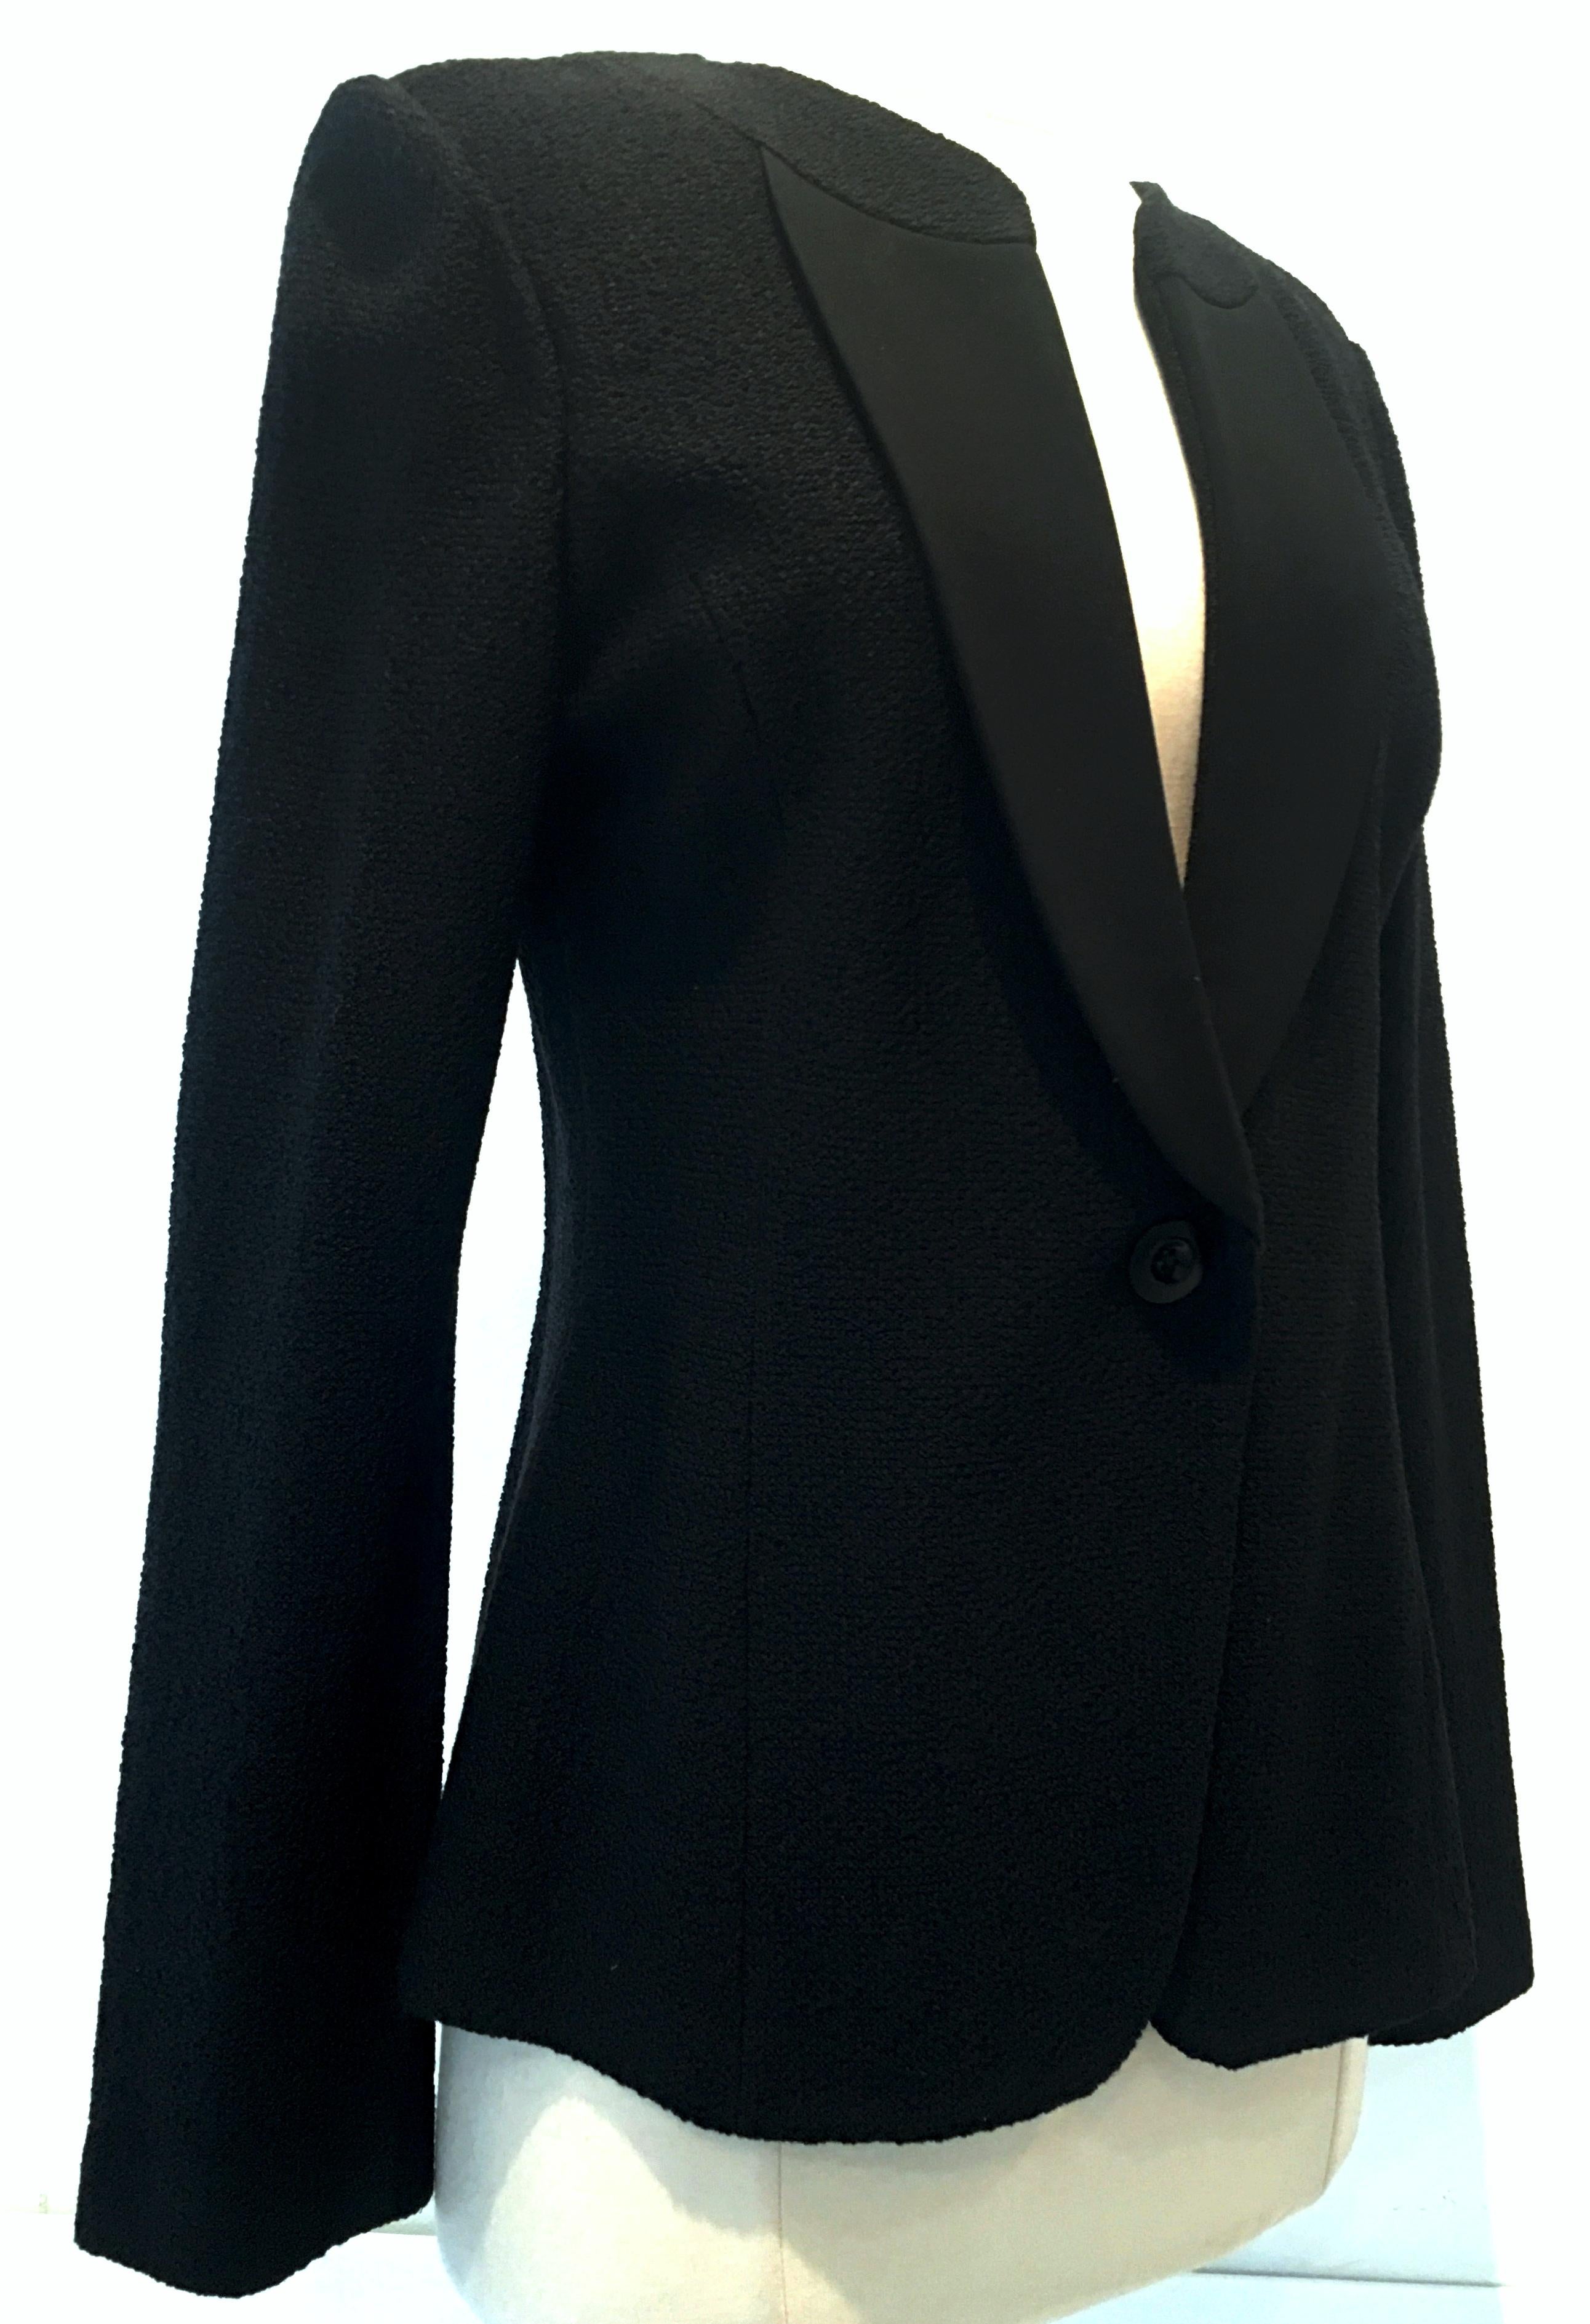 21st Century St. John Black  Silk Knit Jacket. This single breasted silk knit nubby blend jacket features silk chiffon lapels with a single button closure.
Marked on the interior with original manufactures label St. John -Size 8 - Made In The USA
